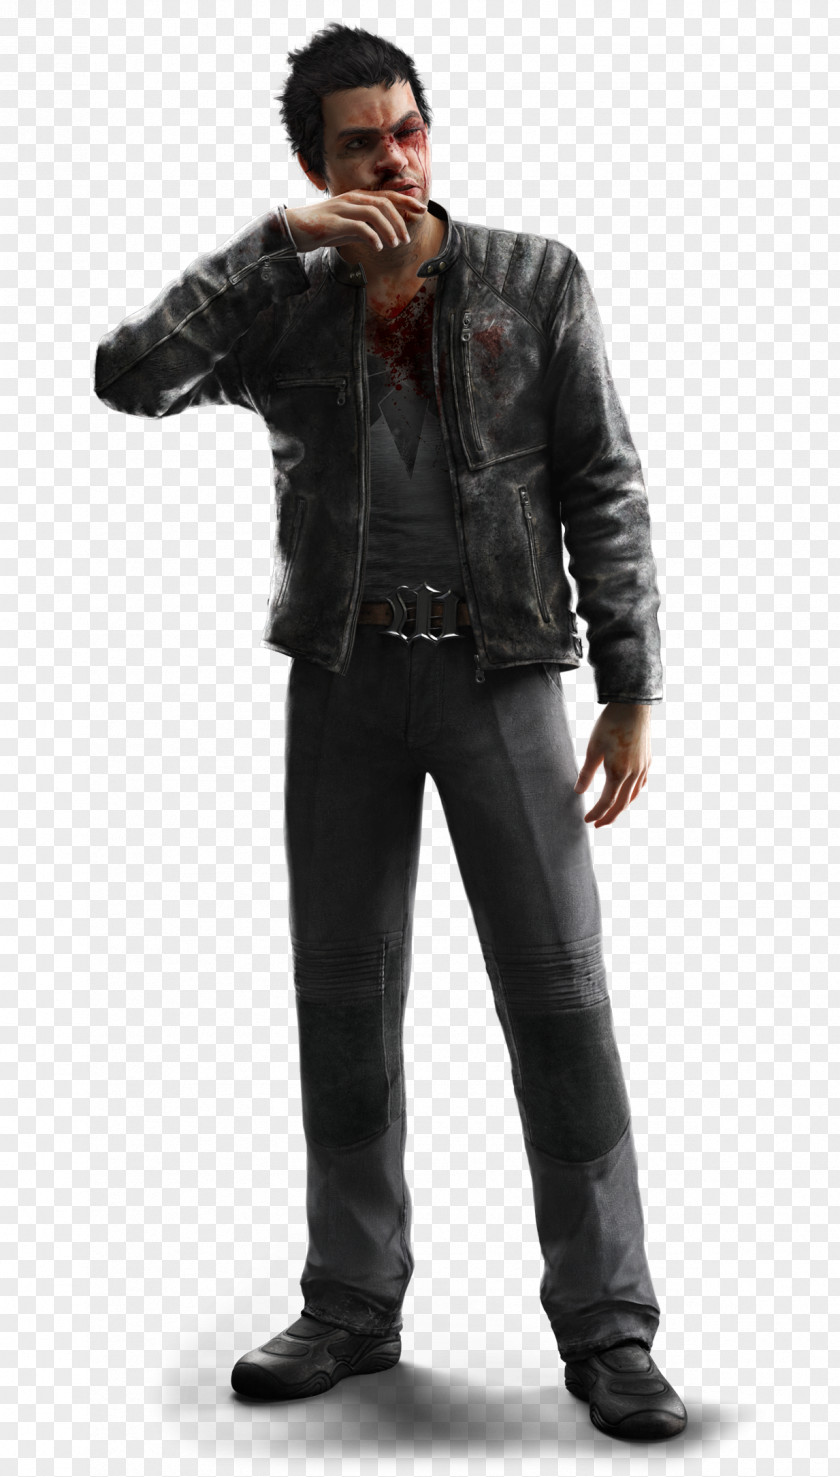 Watch Dogs 2 Leather Jacket Coat PNG